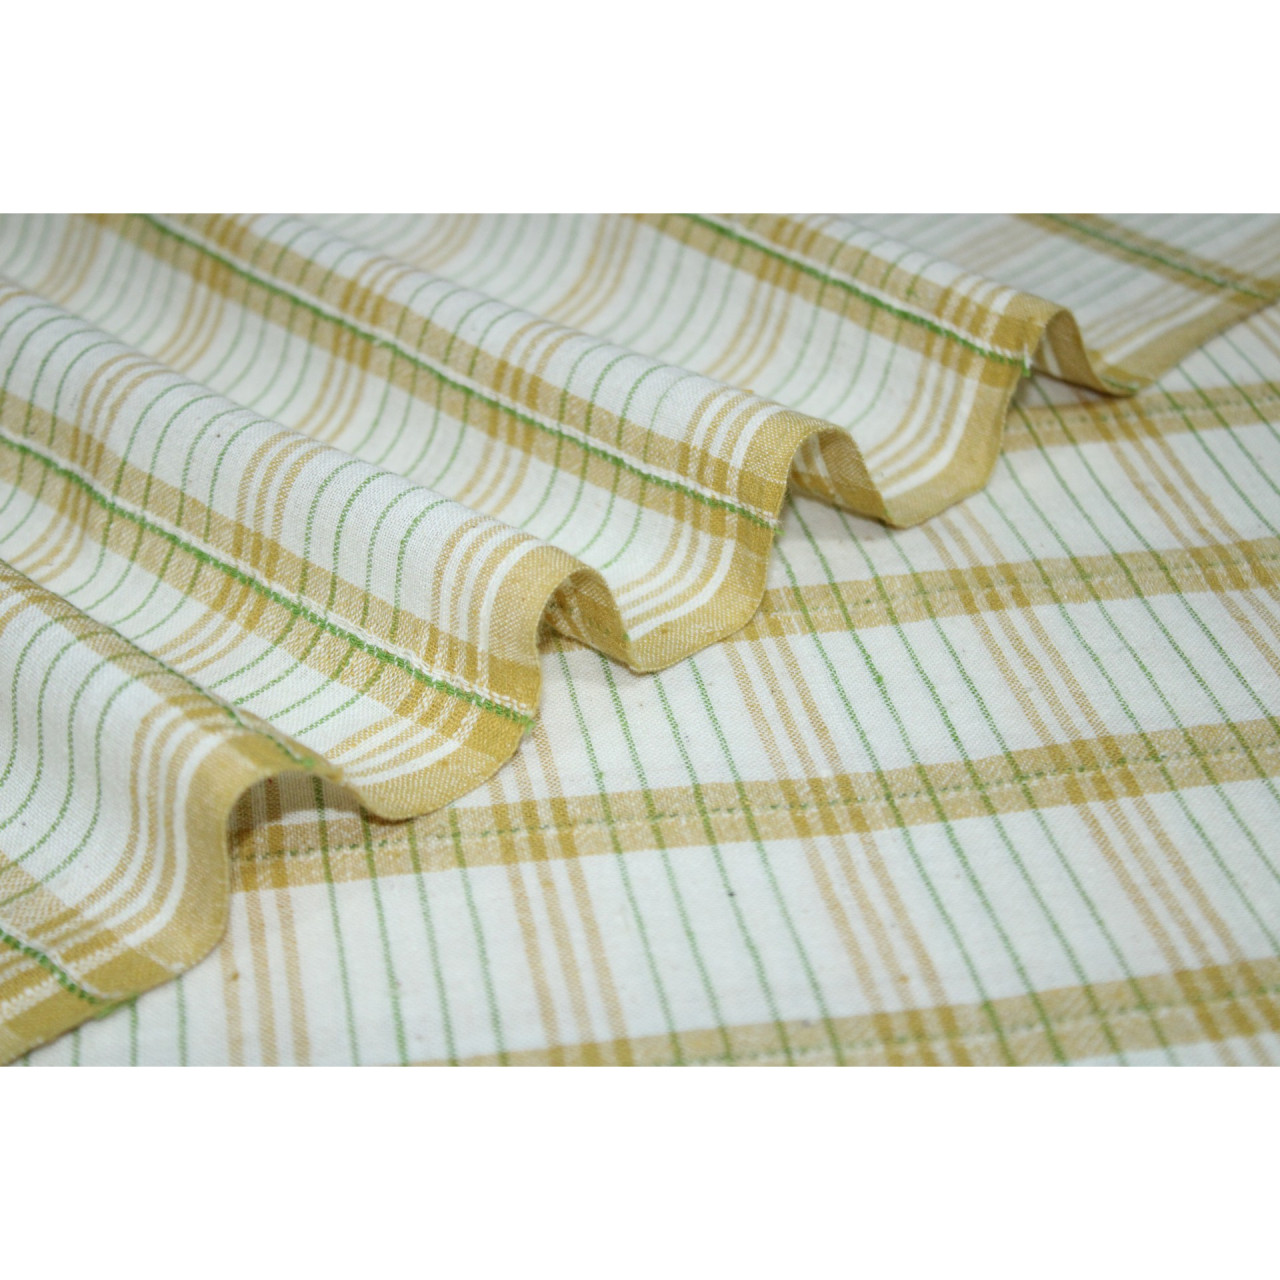 (2126) Kala cotton Azo-free dyed Kutchy yardage from Kutch with extra-weft - Yellow, green, white, stripes, textured